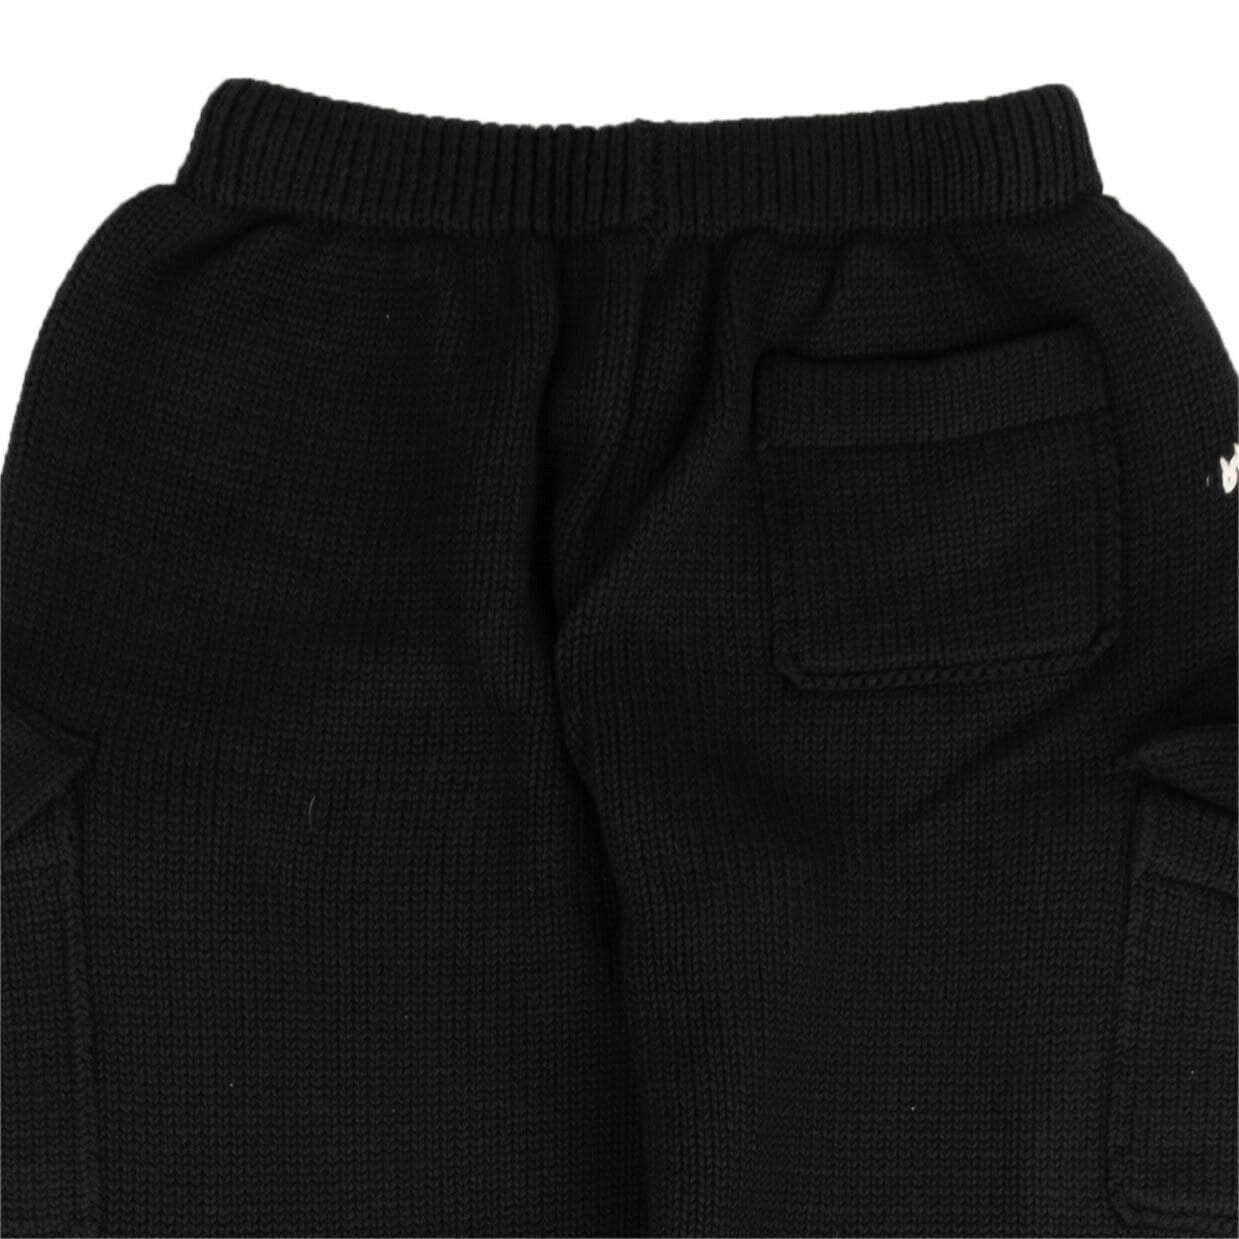 Siberia Hills 250-500, channelenable-all, chicmi, couponcollection, gender-mens, main-clothing, mens-joggers-sweatpants, mens-shoes, size-l, size-m, size-s Black Heavy Tribal Knit Sweatpants